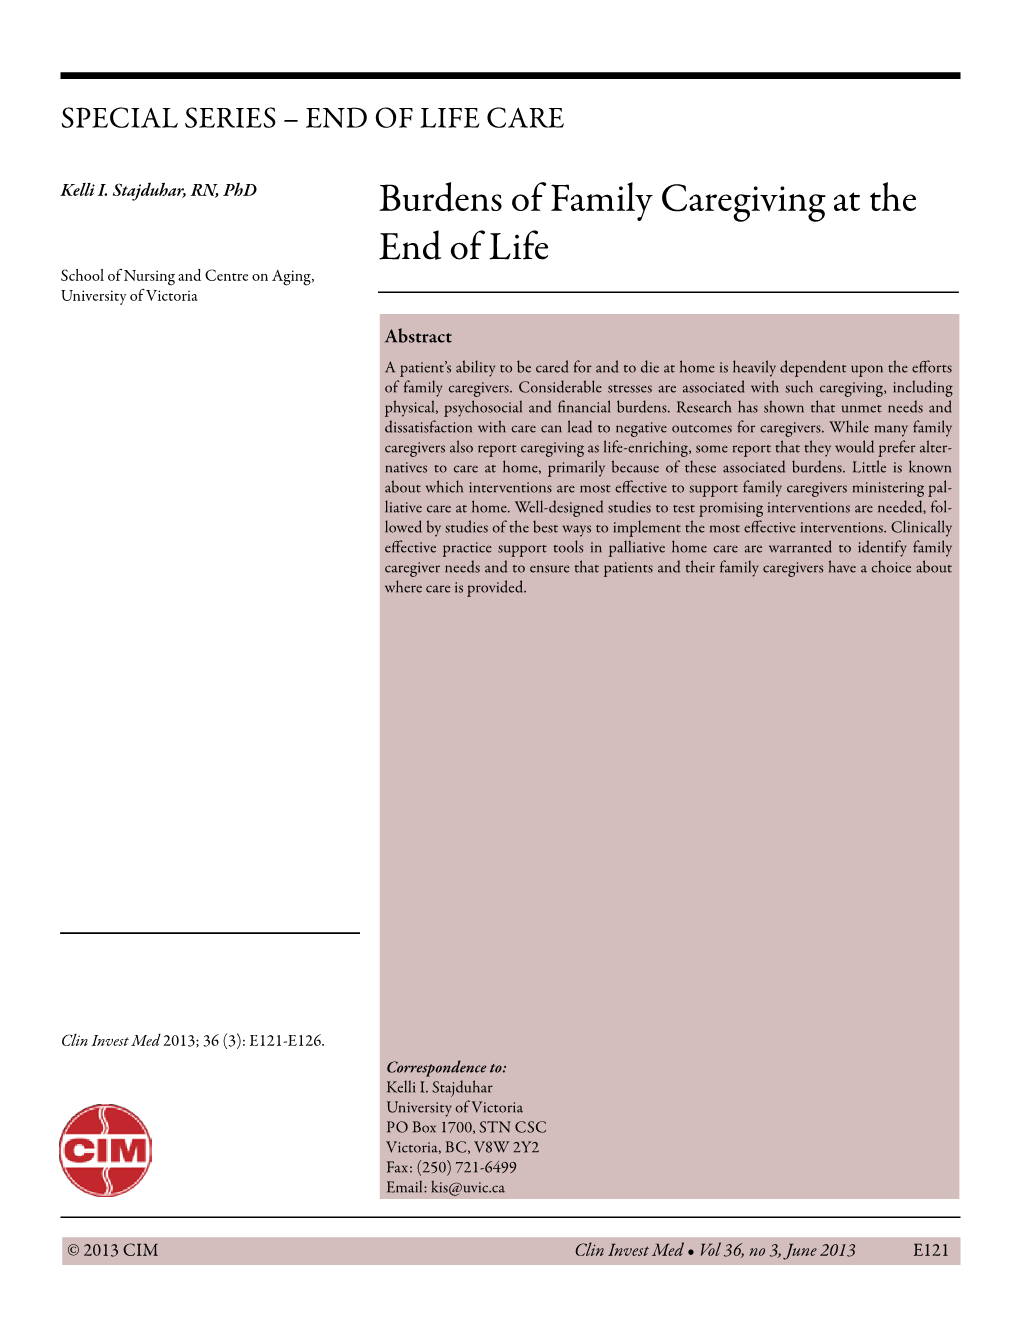 Burdens of Family Caregiving at the End of Life School of Nursing and Centre on Aging, University of Victoria